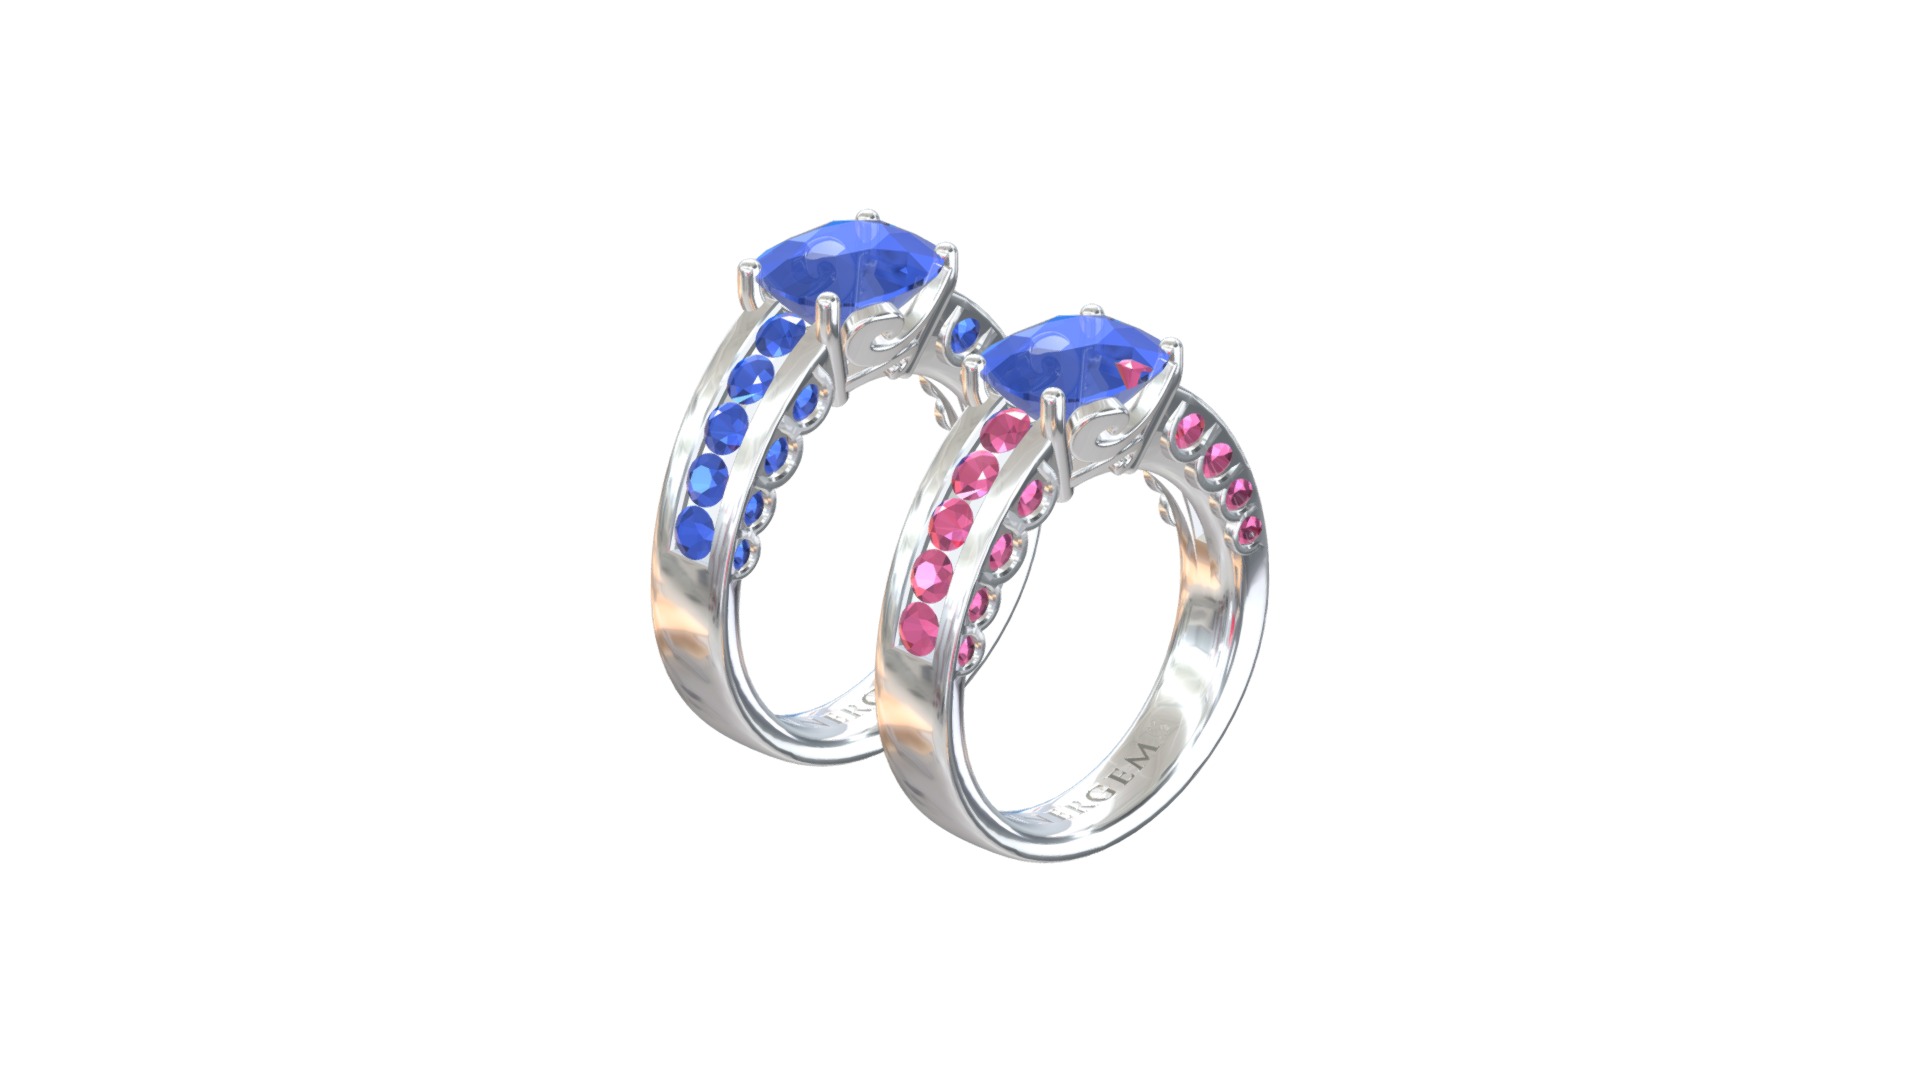 3D model SGO379 - This is a 3D model of the SGO379. The 3D model is about a pair of diamond rings.